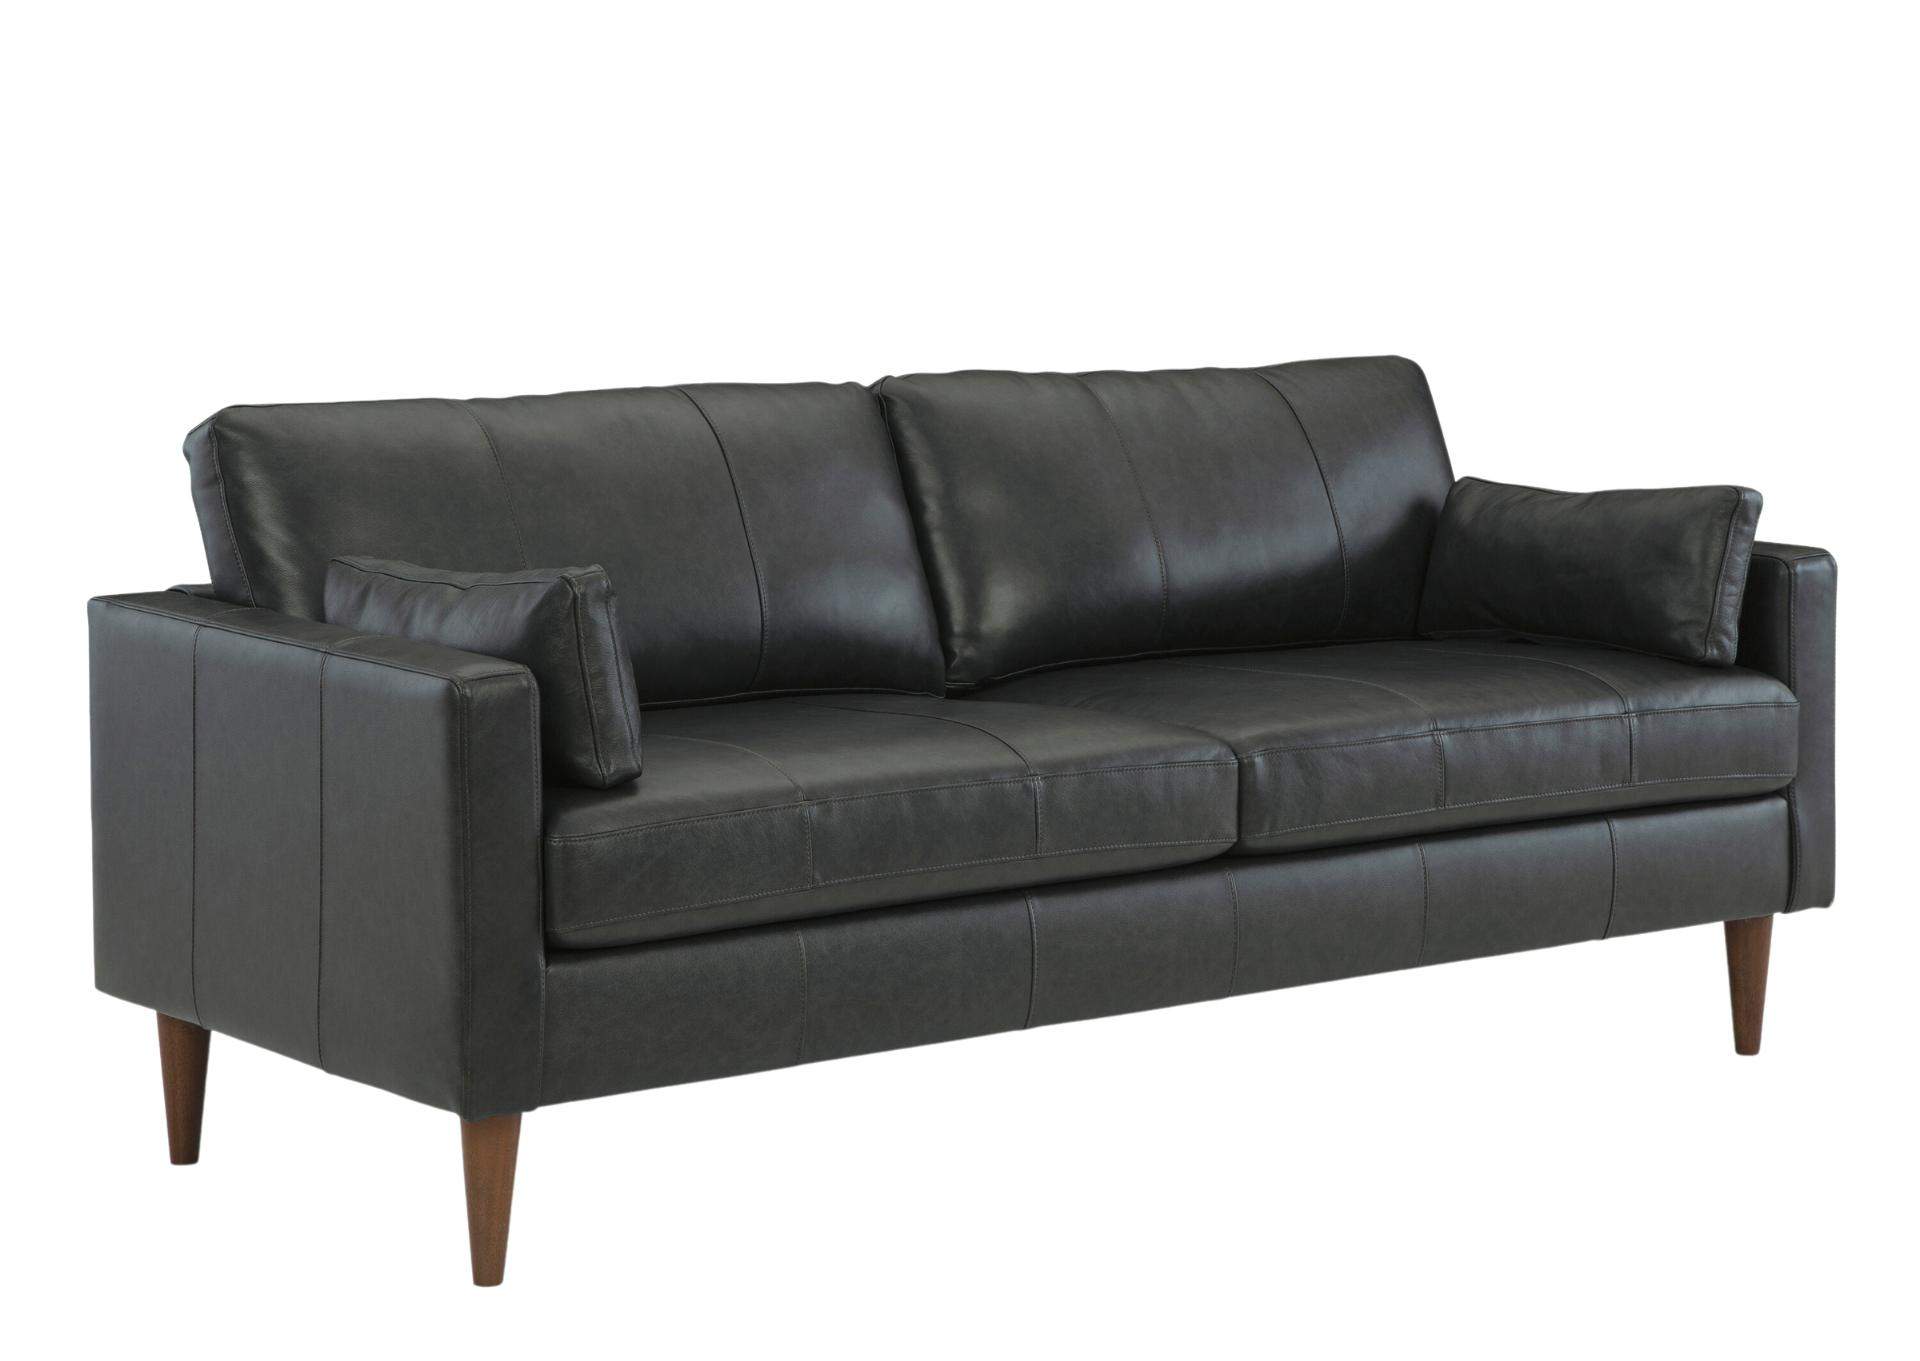 TRAFTON CHARCOAL LEATHER SOFA,BEST CHAIRS INC